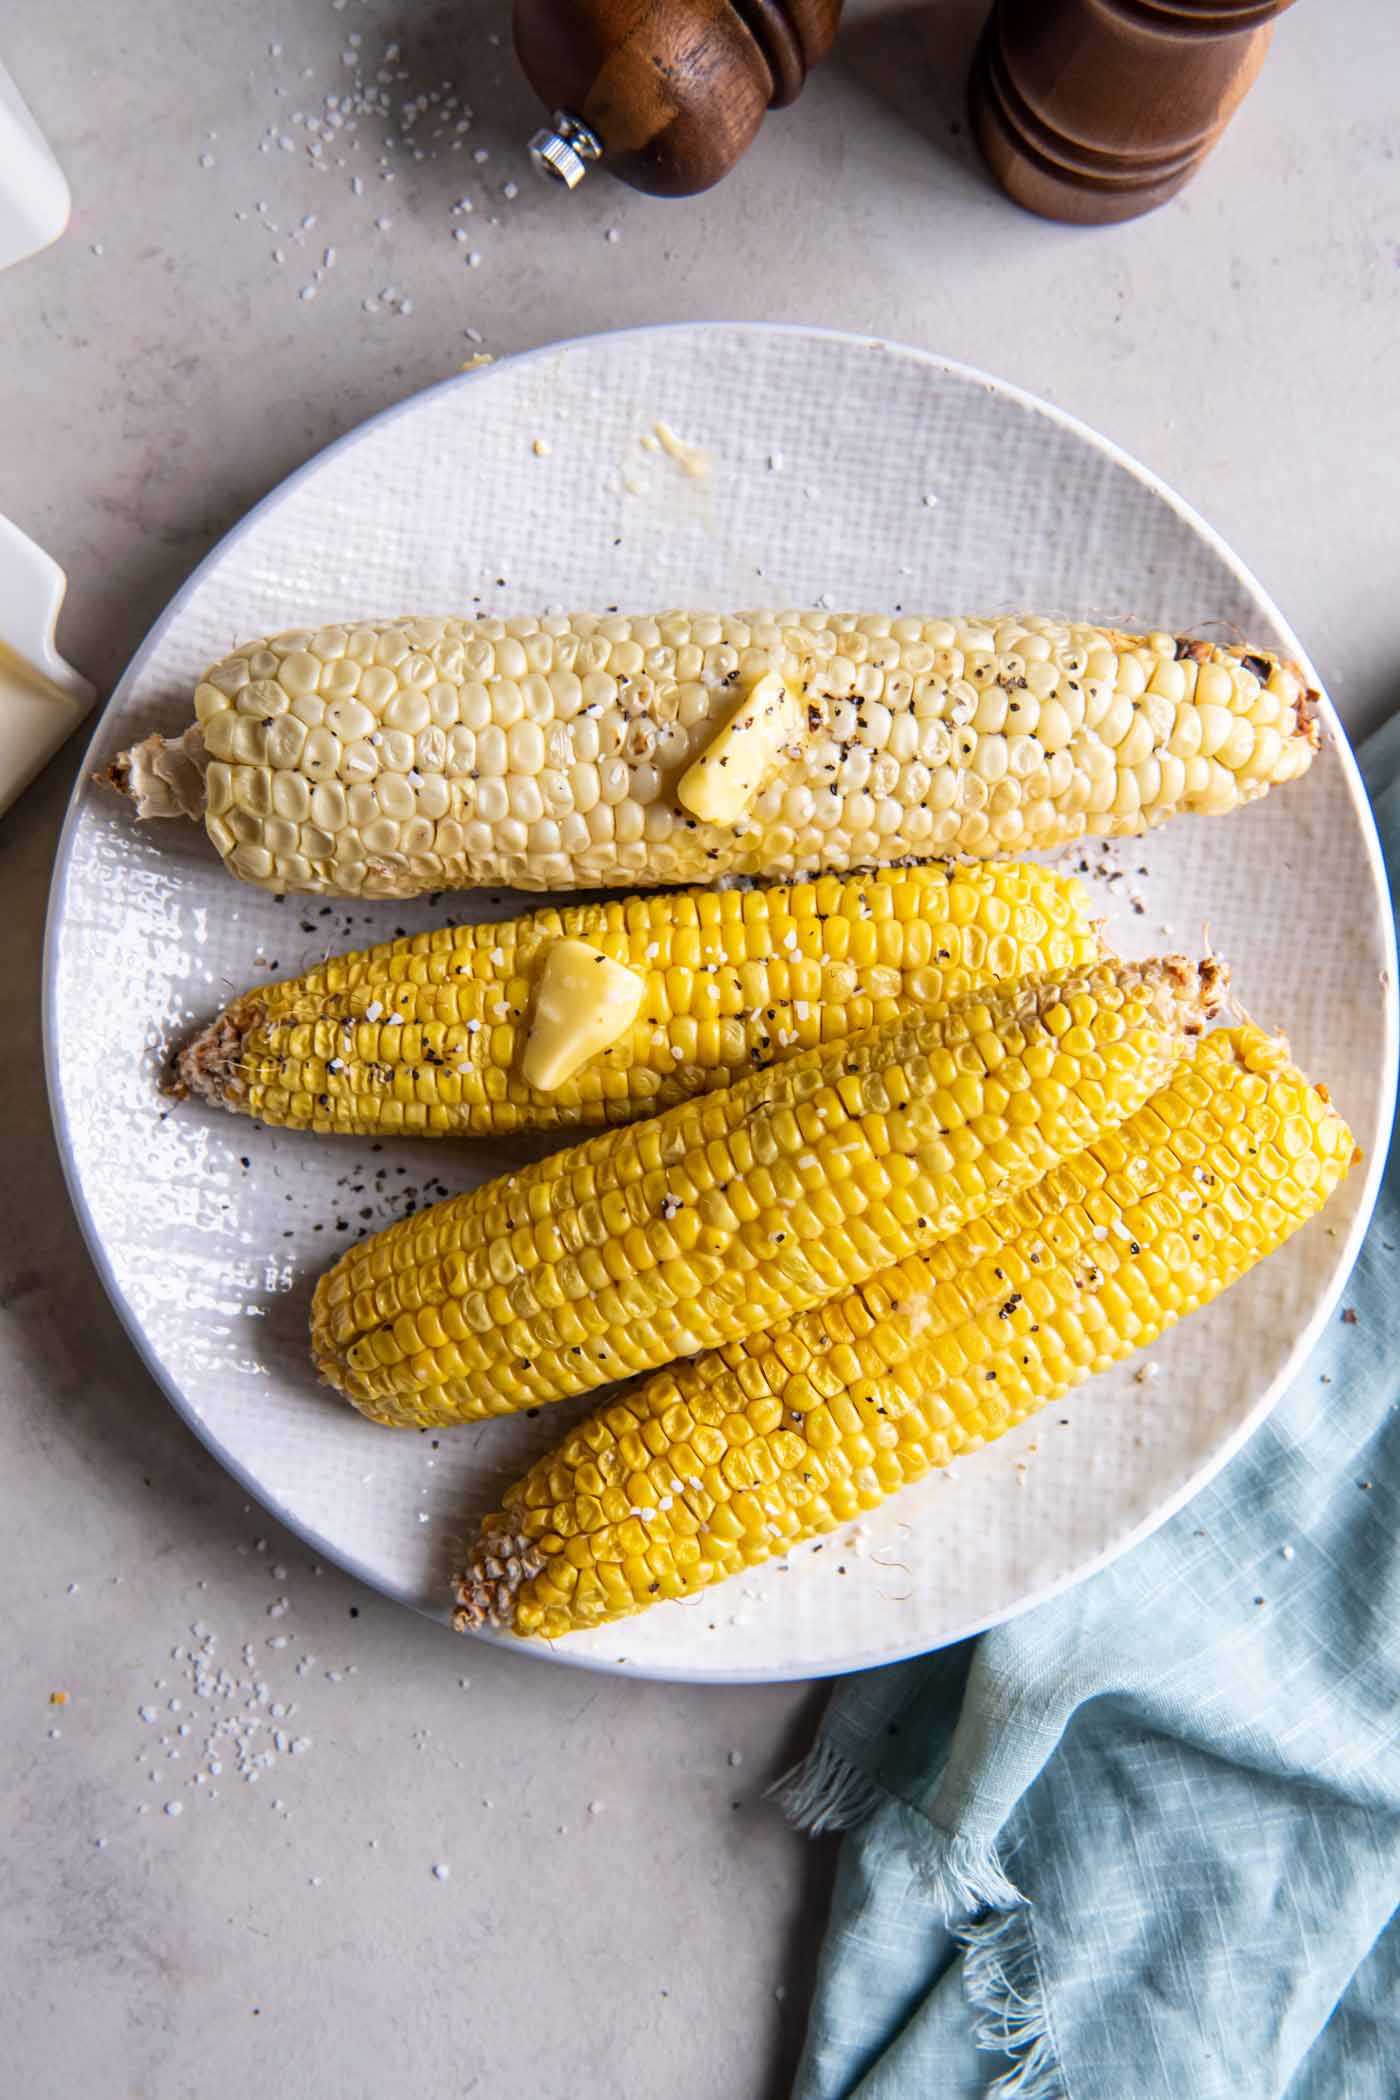 Four ears of corn on a plate with butter, salt and pepper.